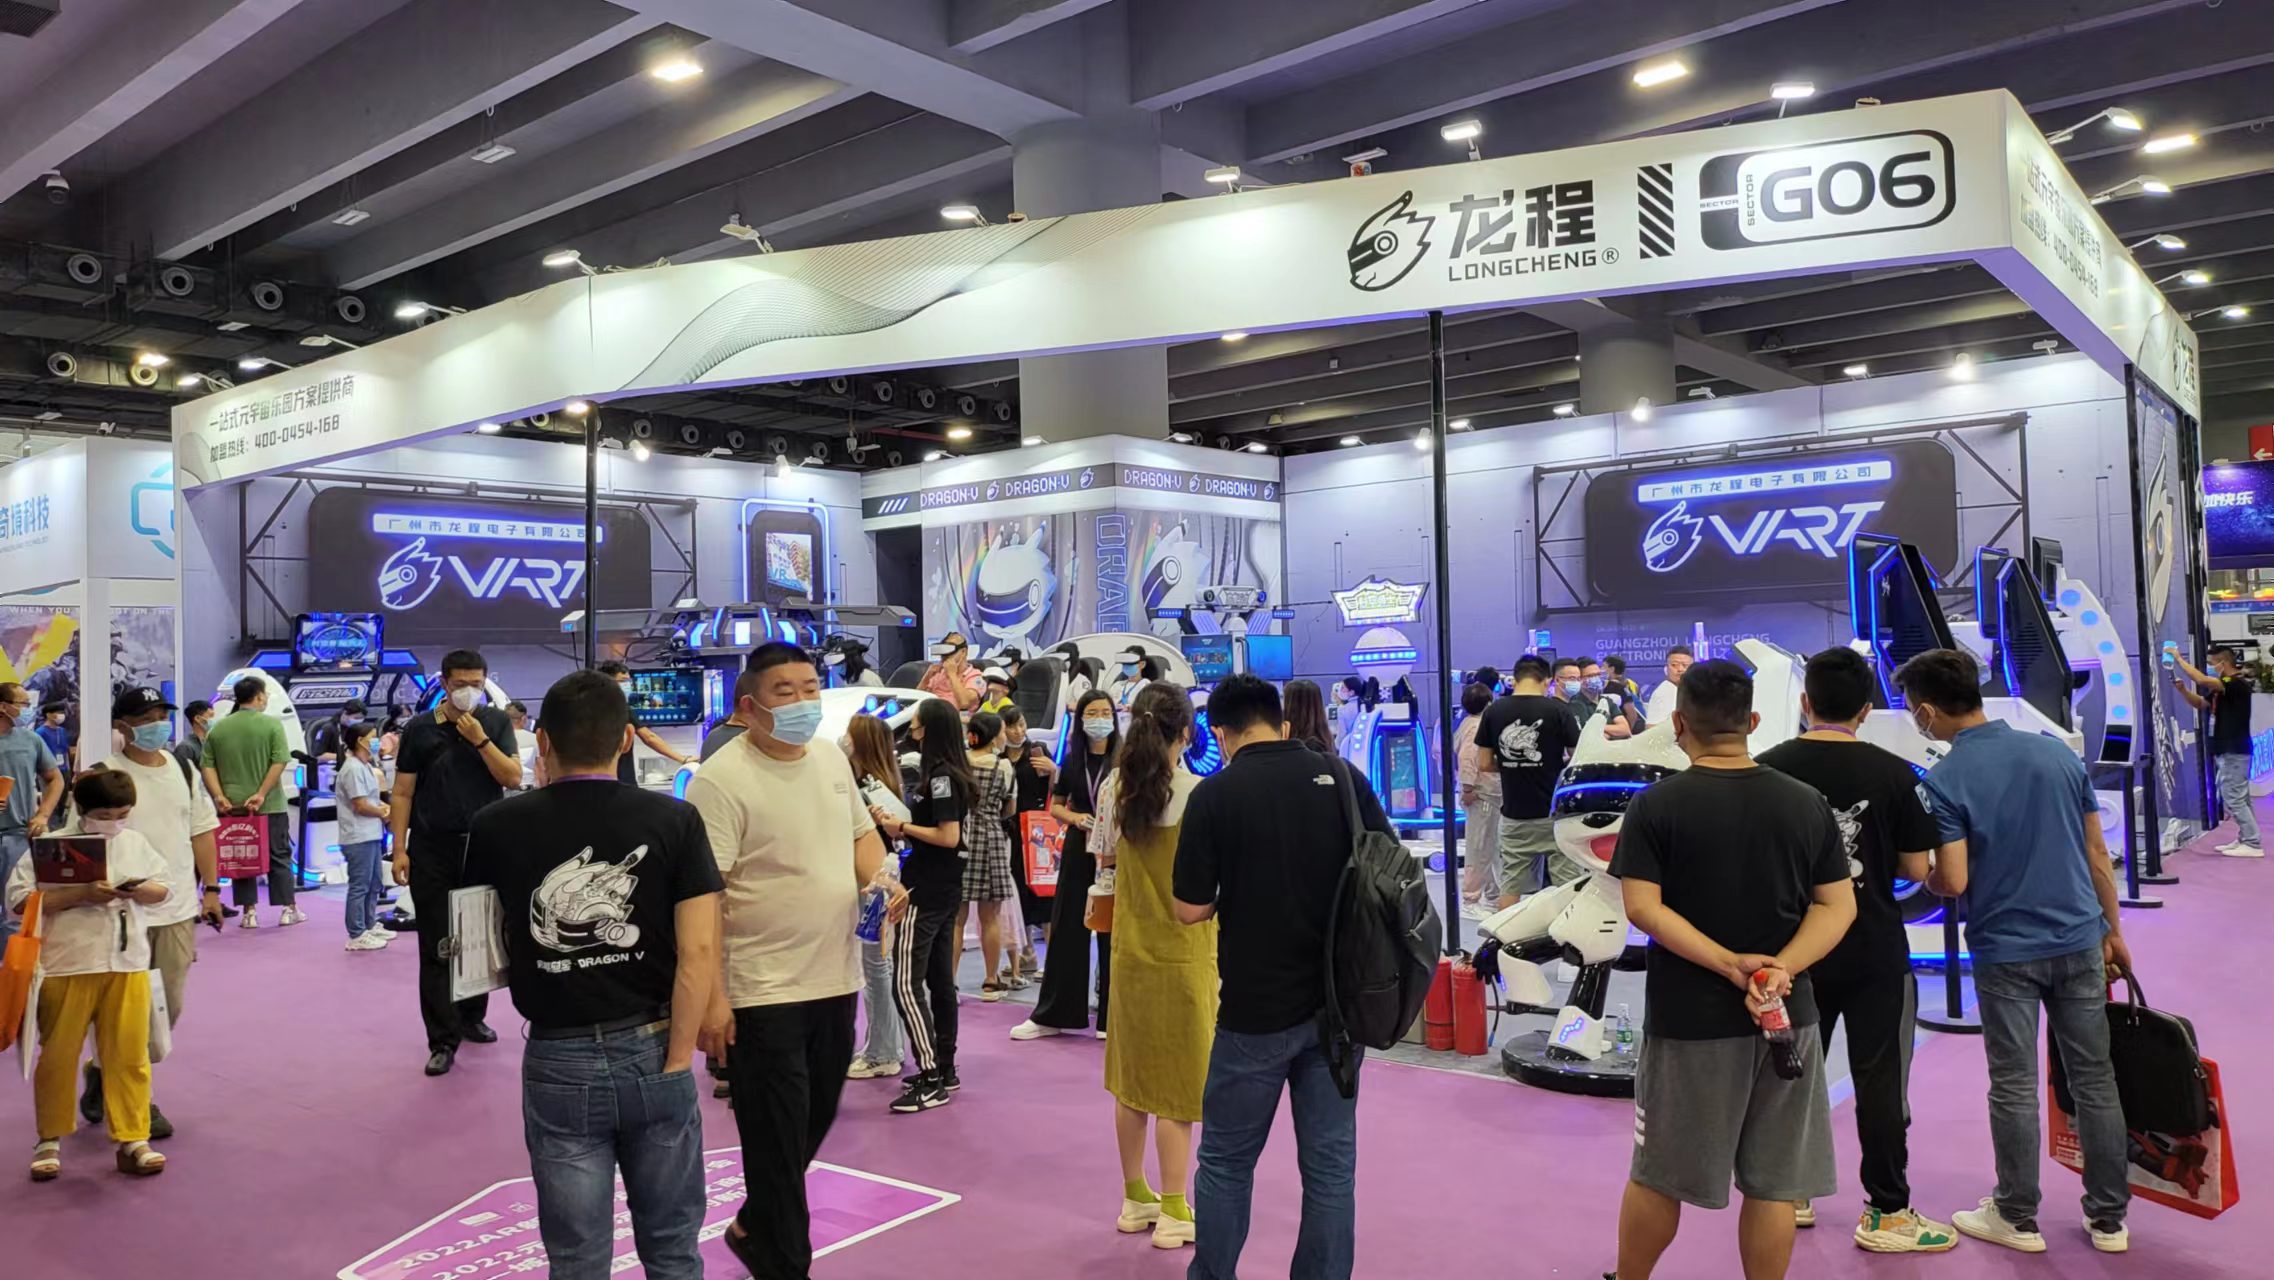 VART VR | Guangzhou Metaverse Exhibition Booth G06 Really Popular